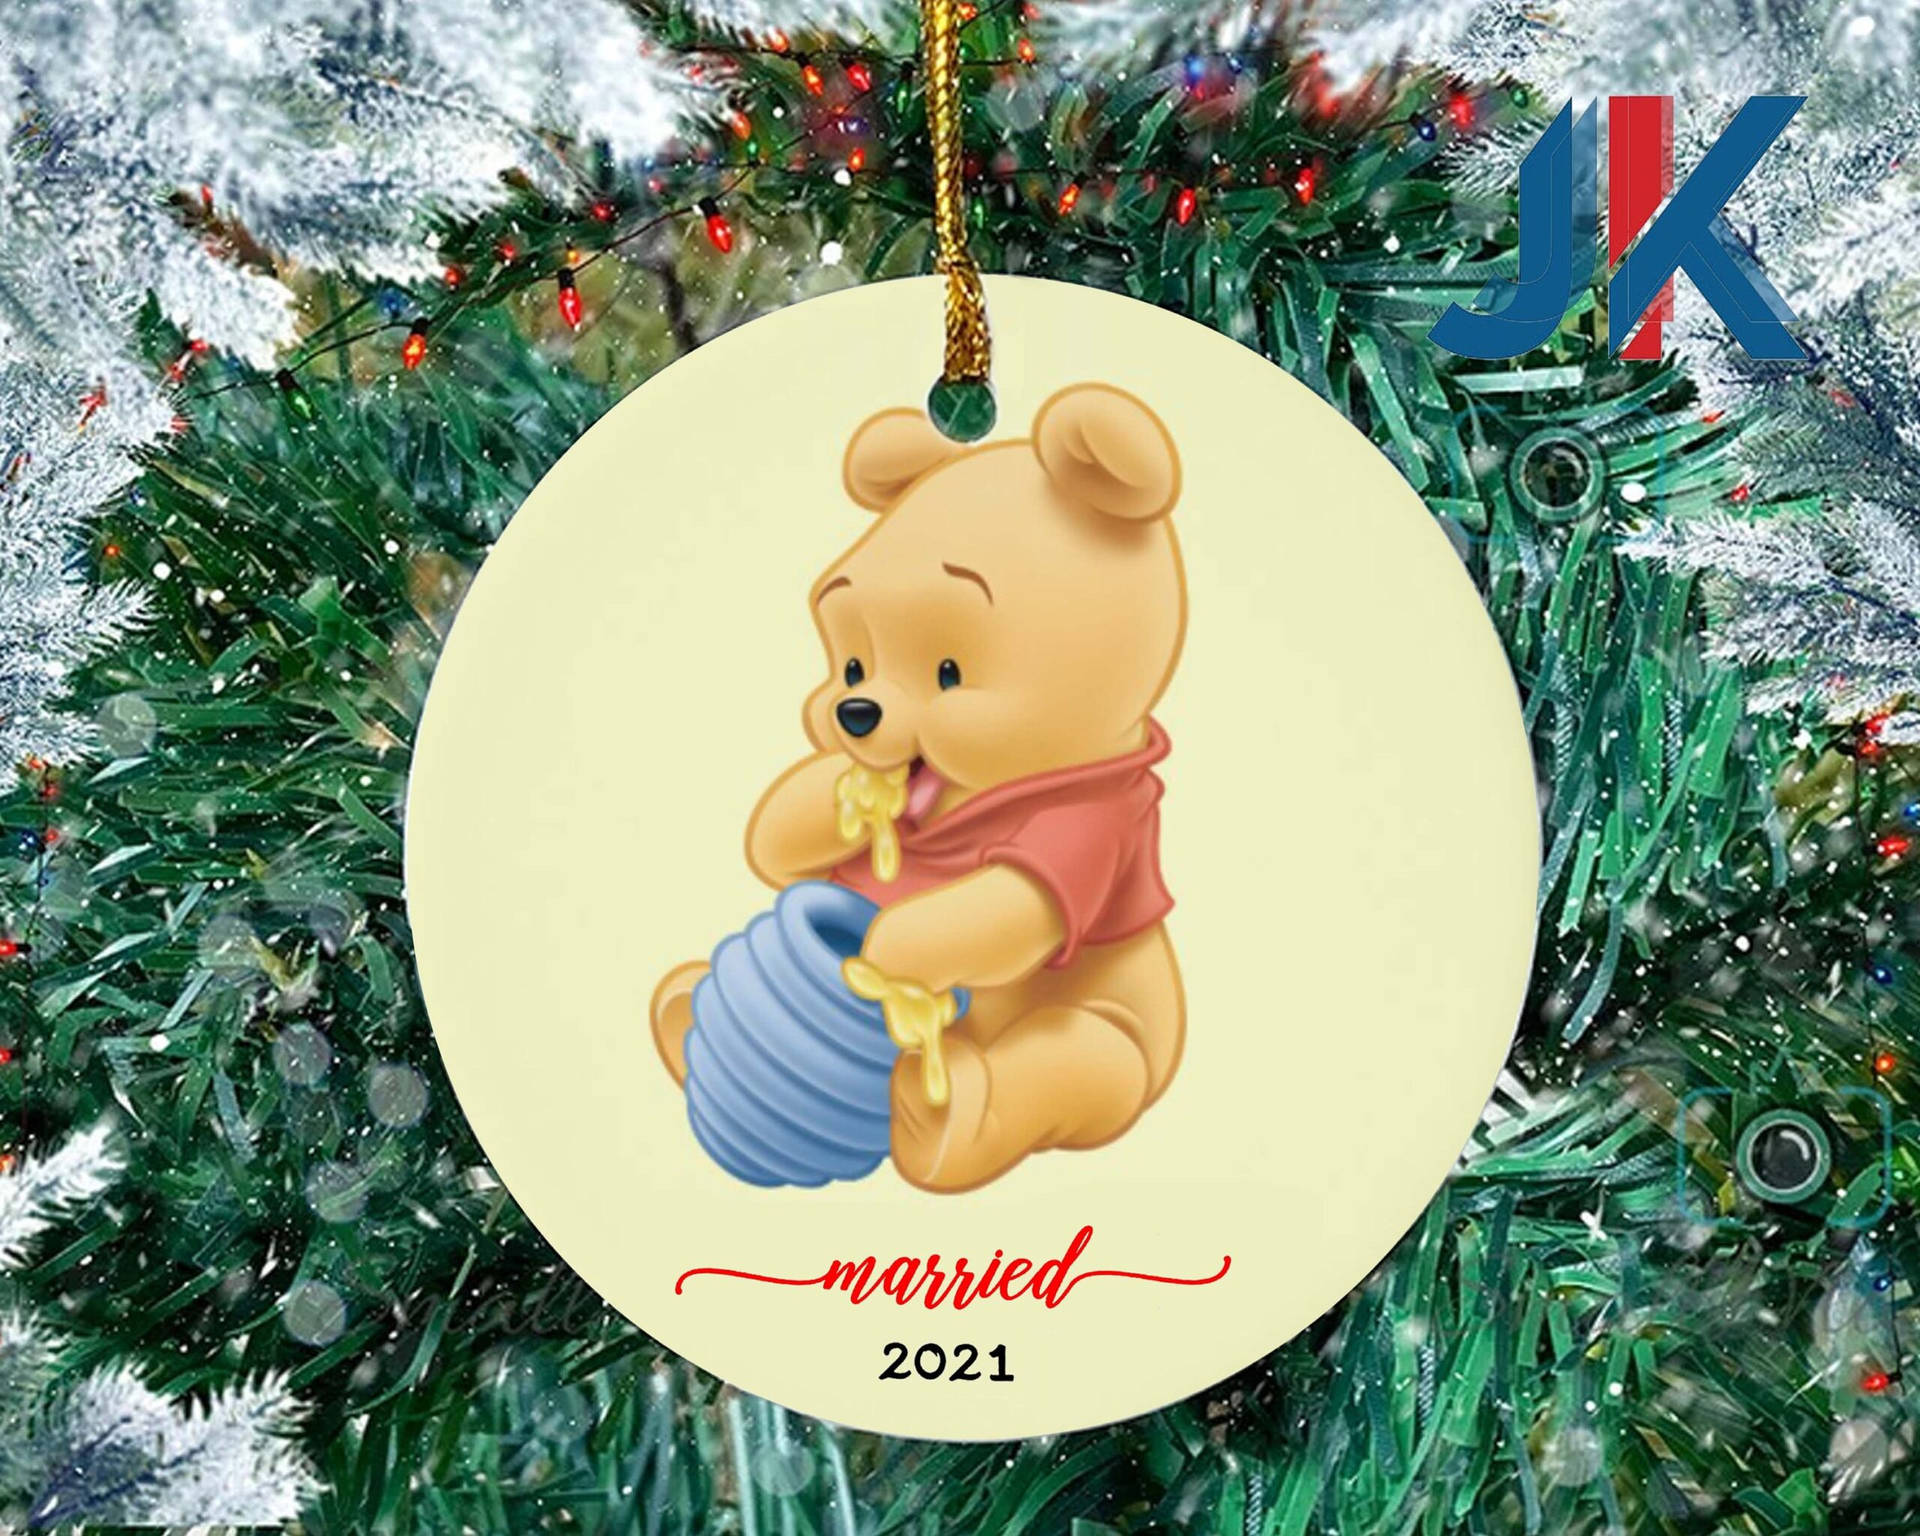 "Tis The Season To Be Jolly With Winnie The Pooh's Christmas Spirit" Wallpaper